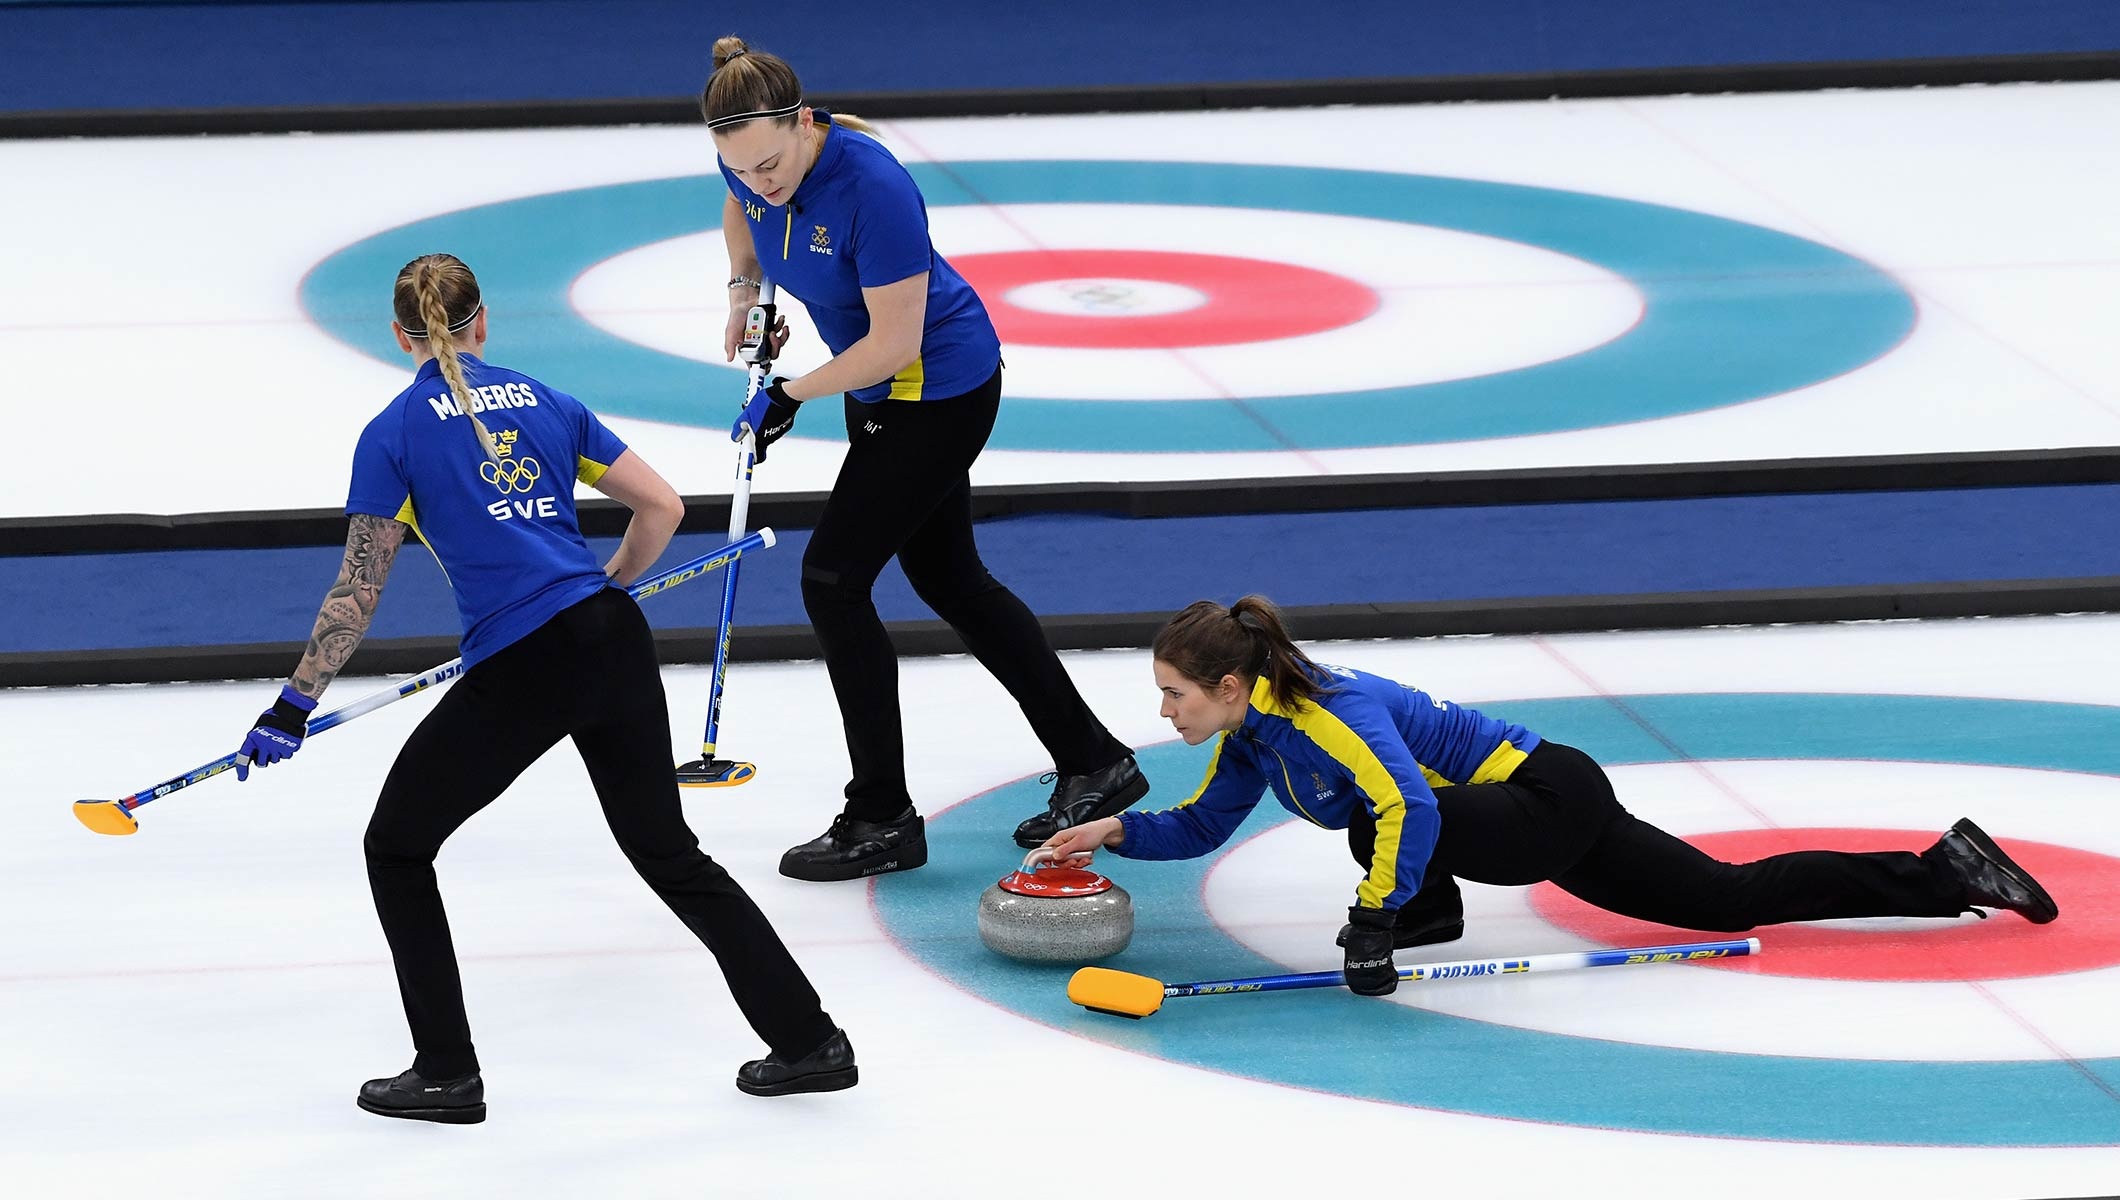 Curling: Sofia Mabergs, Anna Hasselborg, Agnes Knochenhauer, The 2018 Winter Olympics gold medalists. 2120x1200 HD Wallpaper.